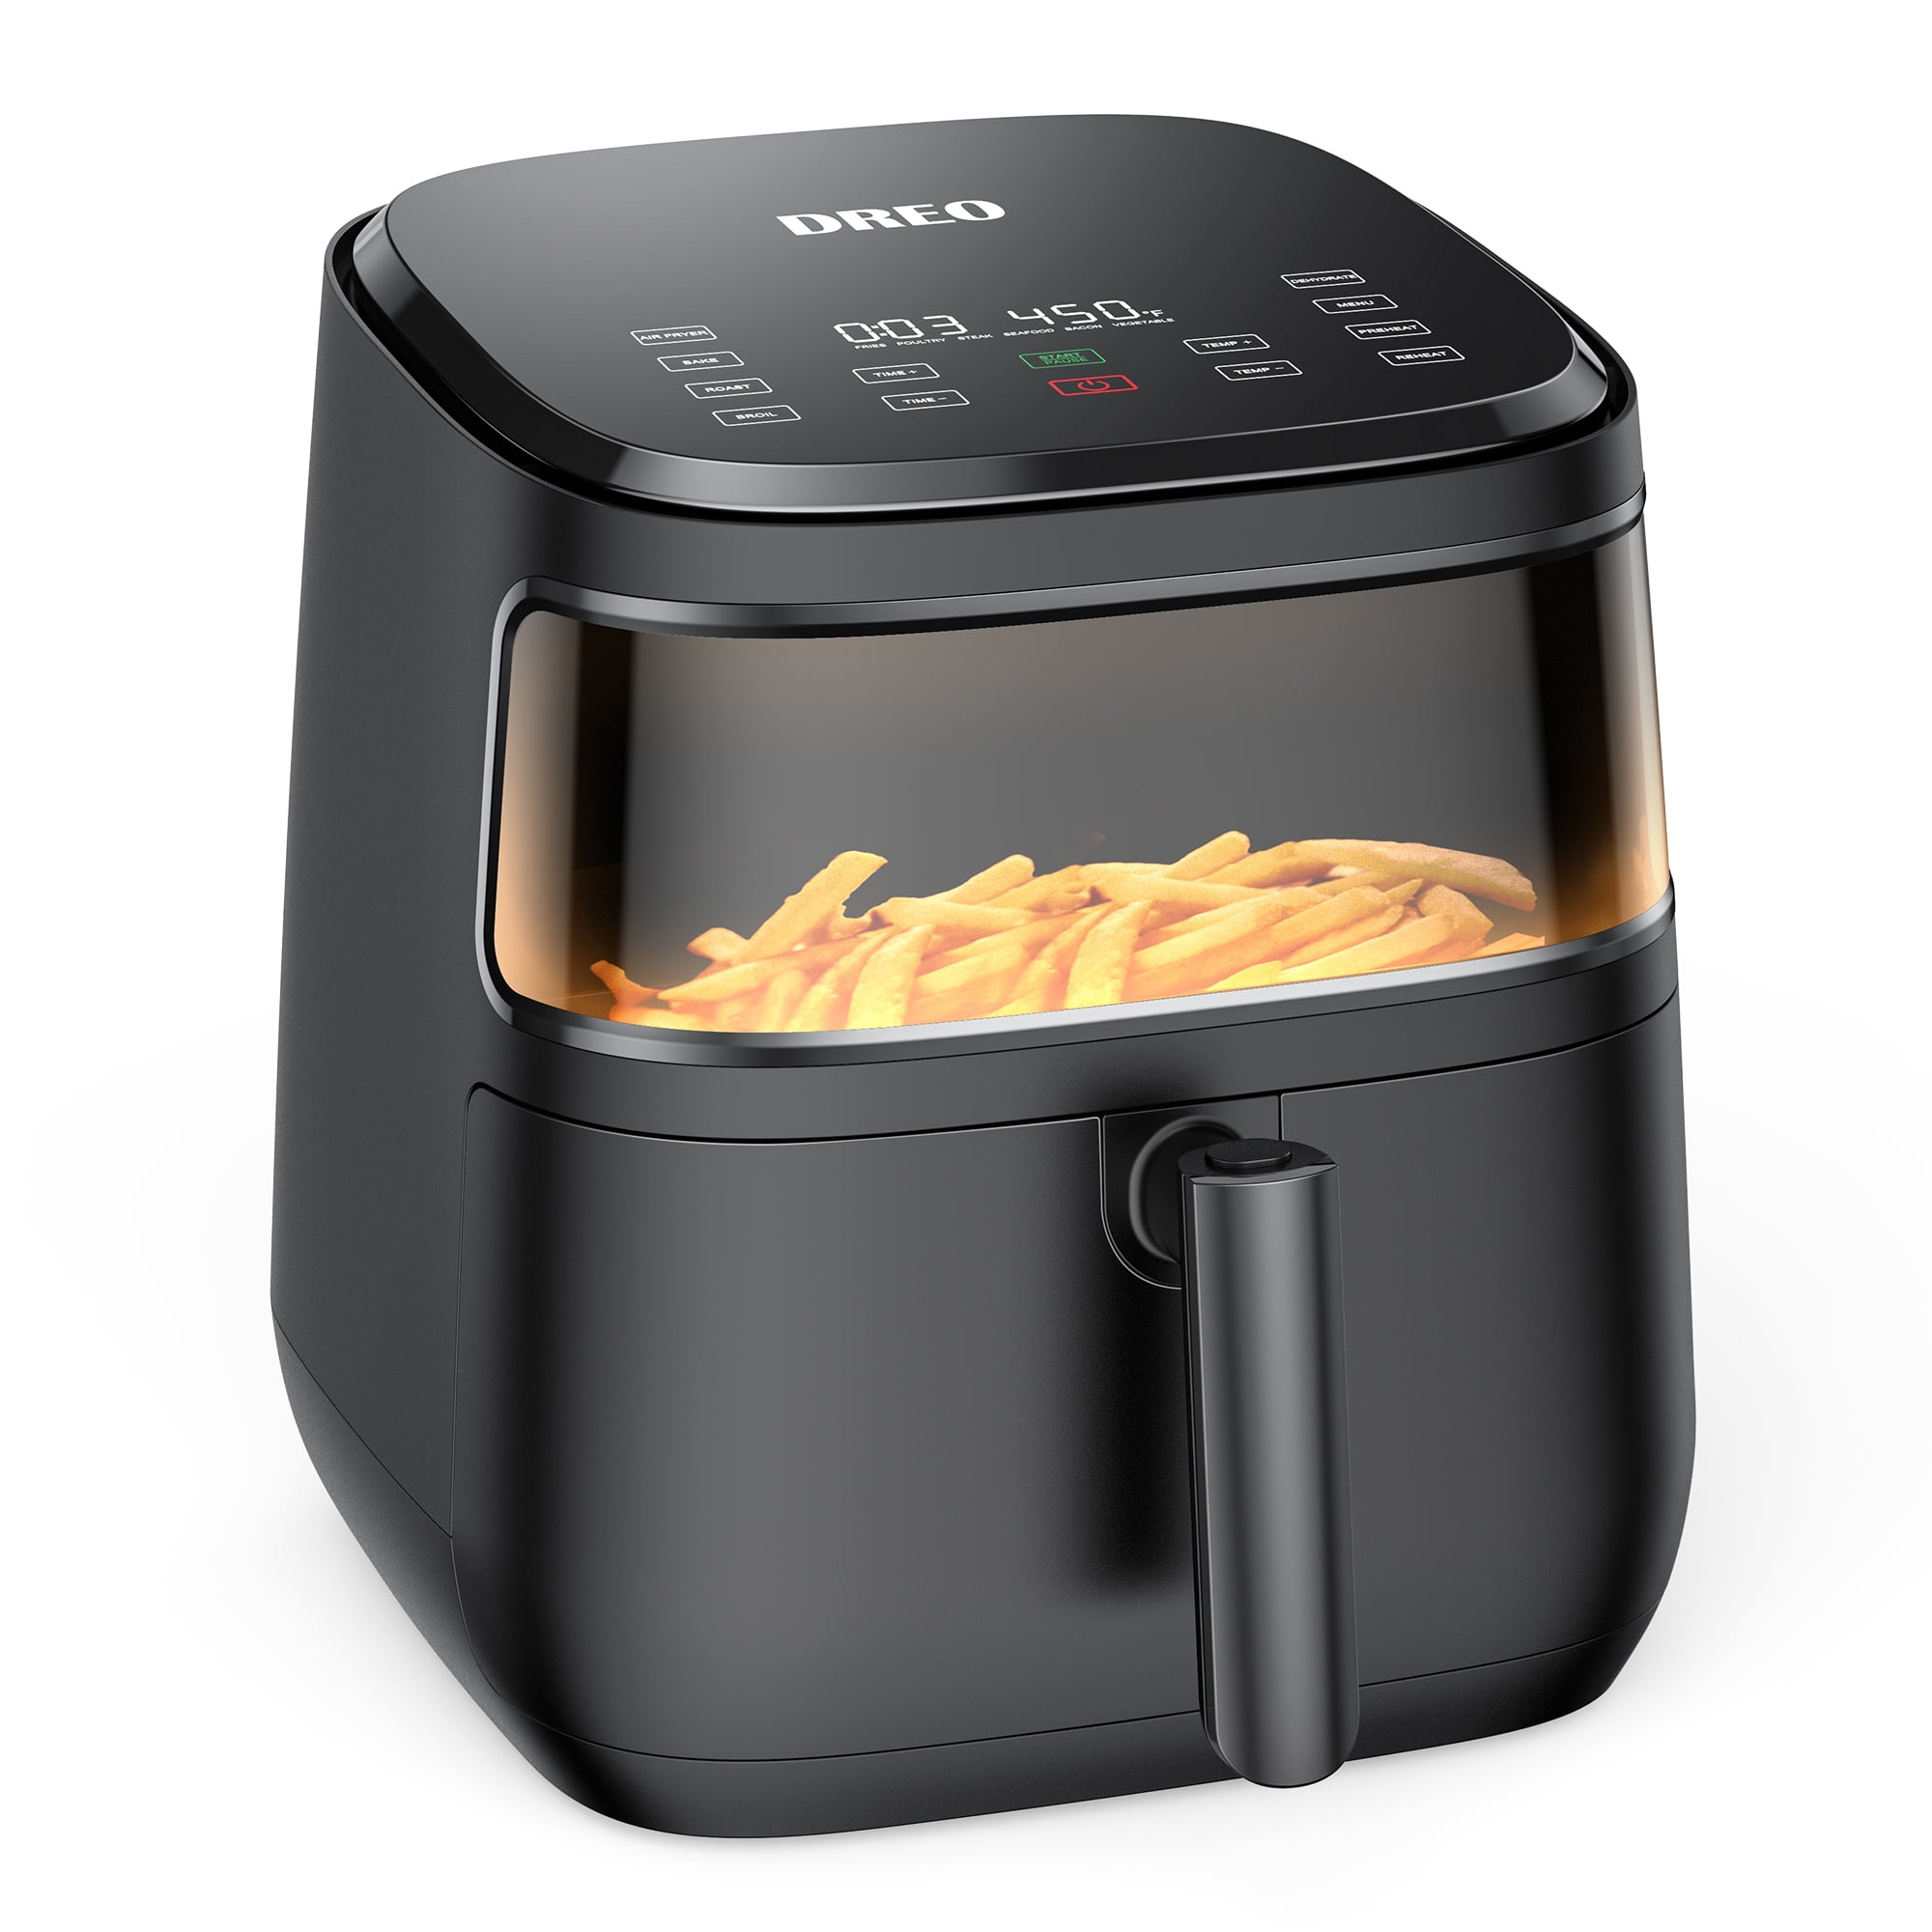 Dreo ChefMaker Combi Fryer, Cook like a pro with just the press of a  button, Smart Air Fryer Cooker with Cook probe, Water Atomizer, 3  professional